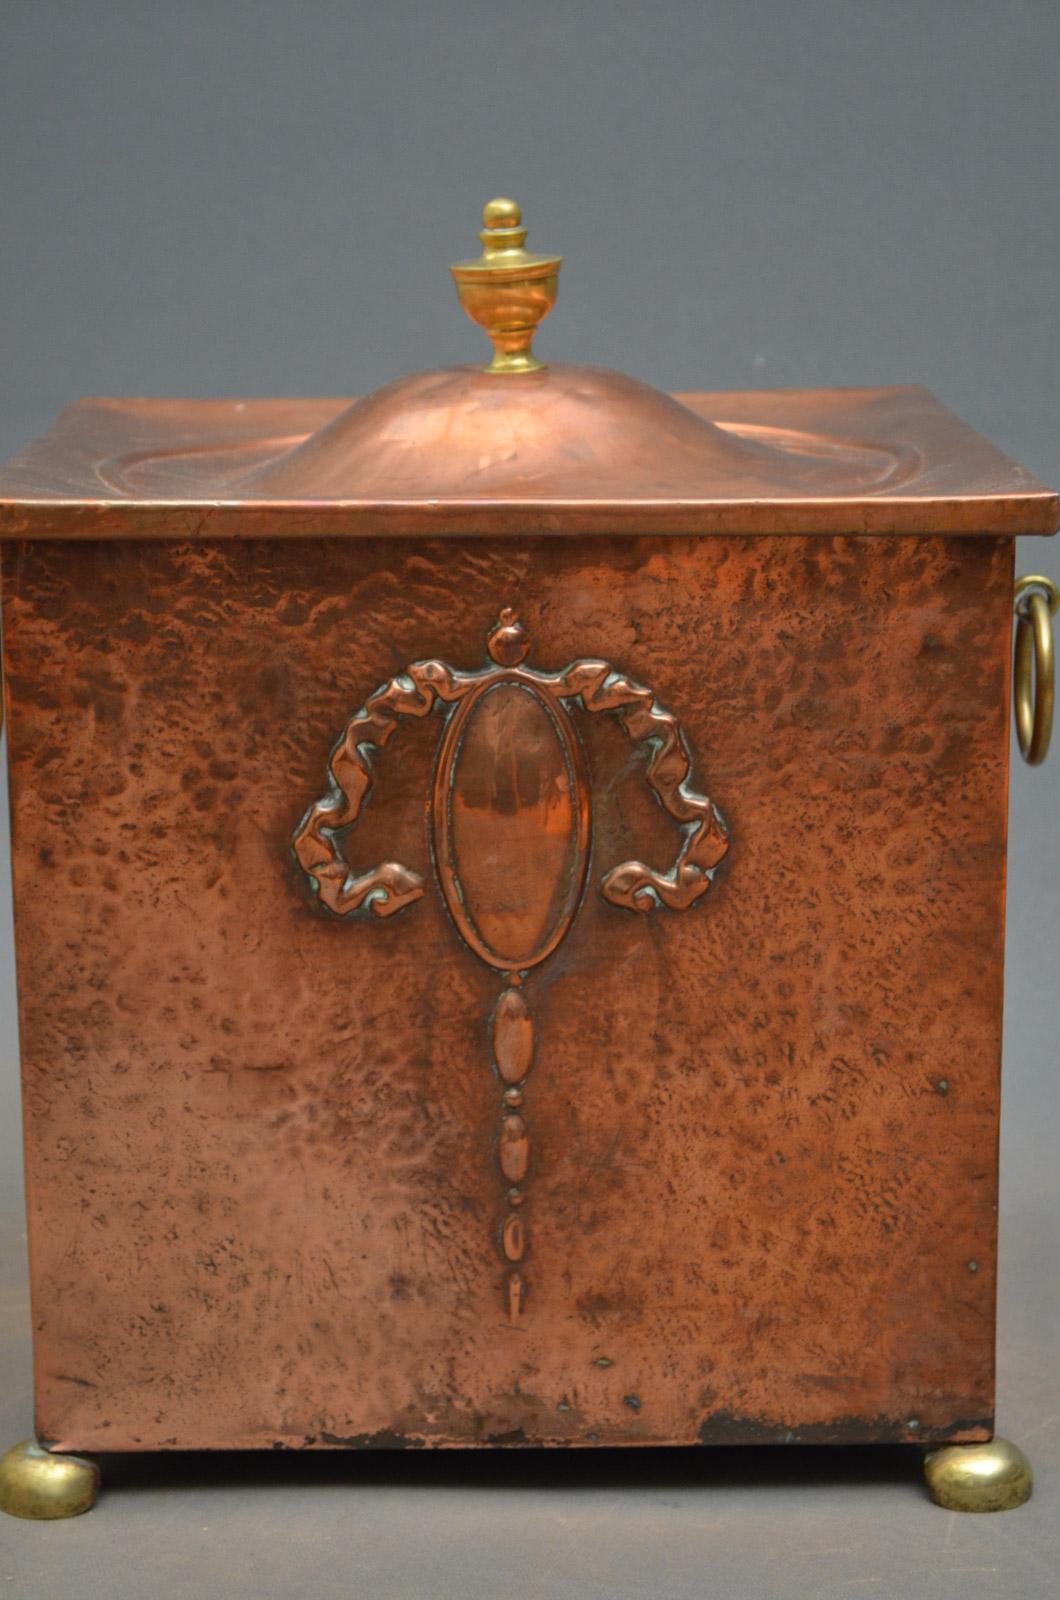 K0195, an attractive Edwardian copper coal bucket / coal bin, with original lid with brass finial, stylish embossed front and original brass handles, all standing on original brass bun feet. All in excellent condition ready to place at home, circa